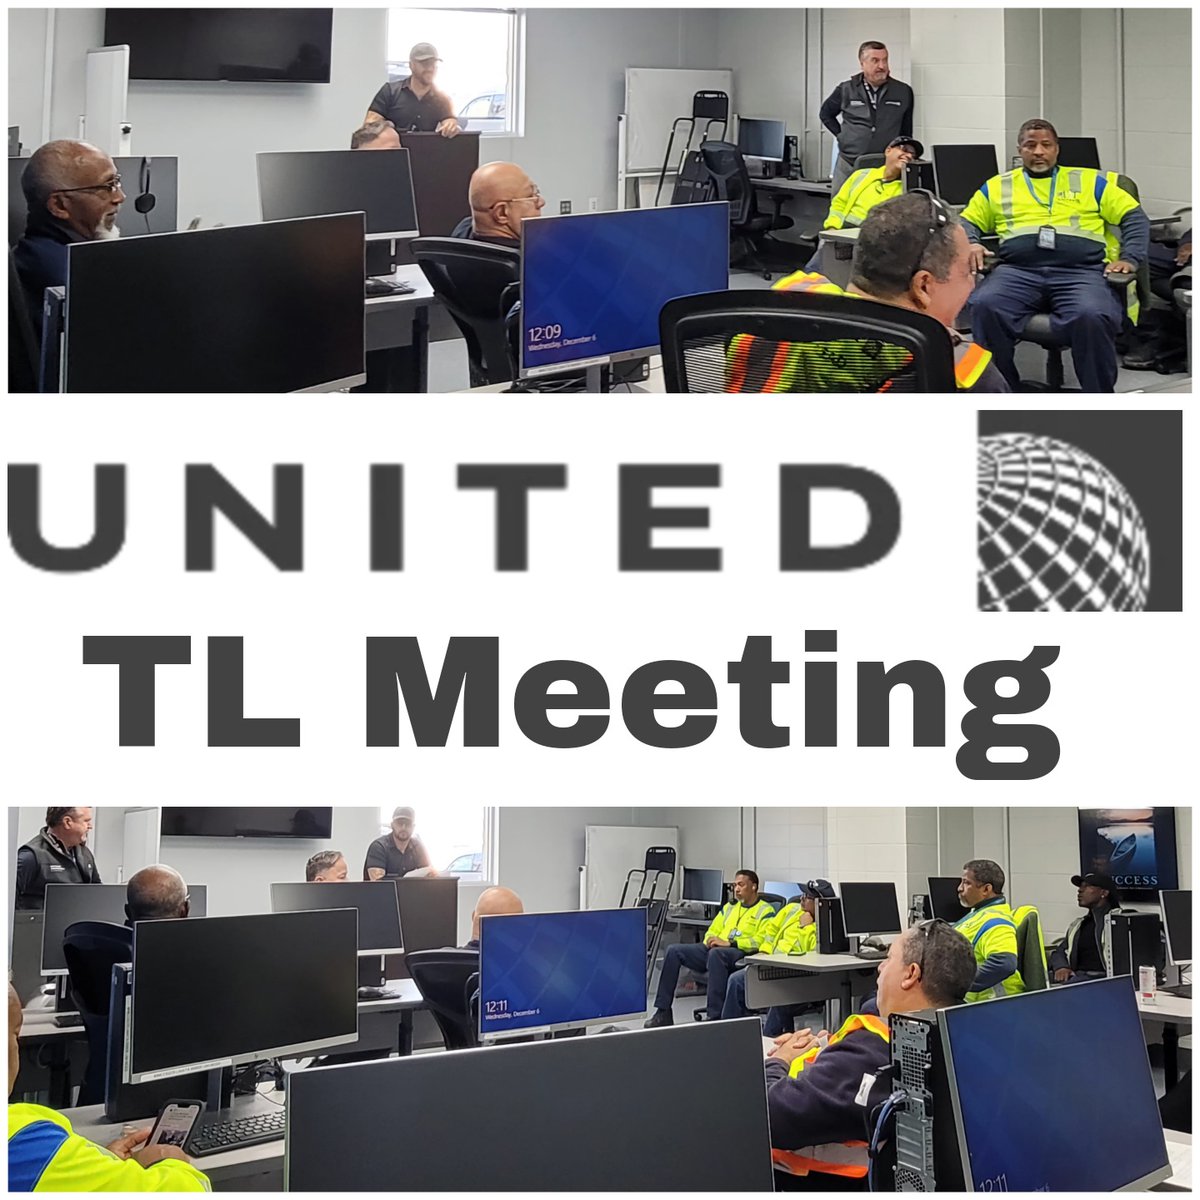 Happy holidays, @united! #MCOFinest attending my TL meeting w/ @SteveTanzella & @med70258466. As leaders, it's crucial to hear feedback from our team on what barriers they face & how we can help remove those barriers. @LouFarinaccio @AOSafetyUAL @AO_Performance @weareunited 🏆